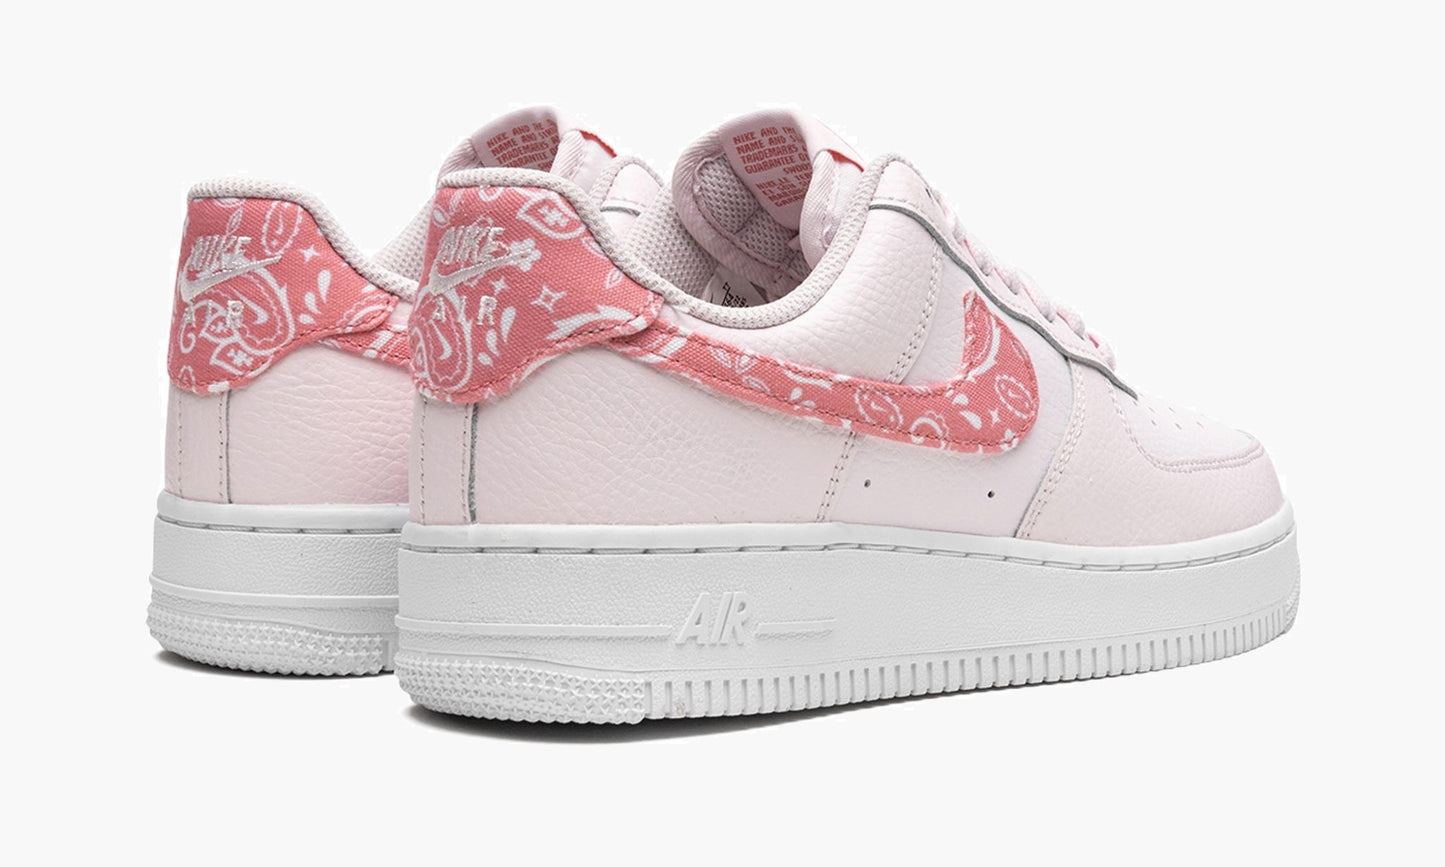 Air Force 1 Low WMNS '07 "Paisley Pack - Pink"